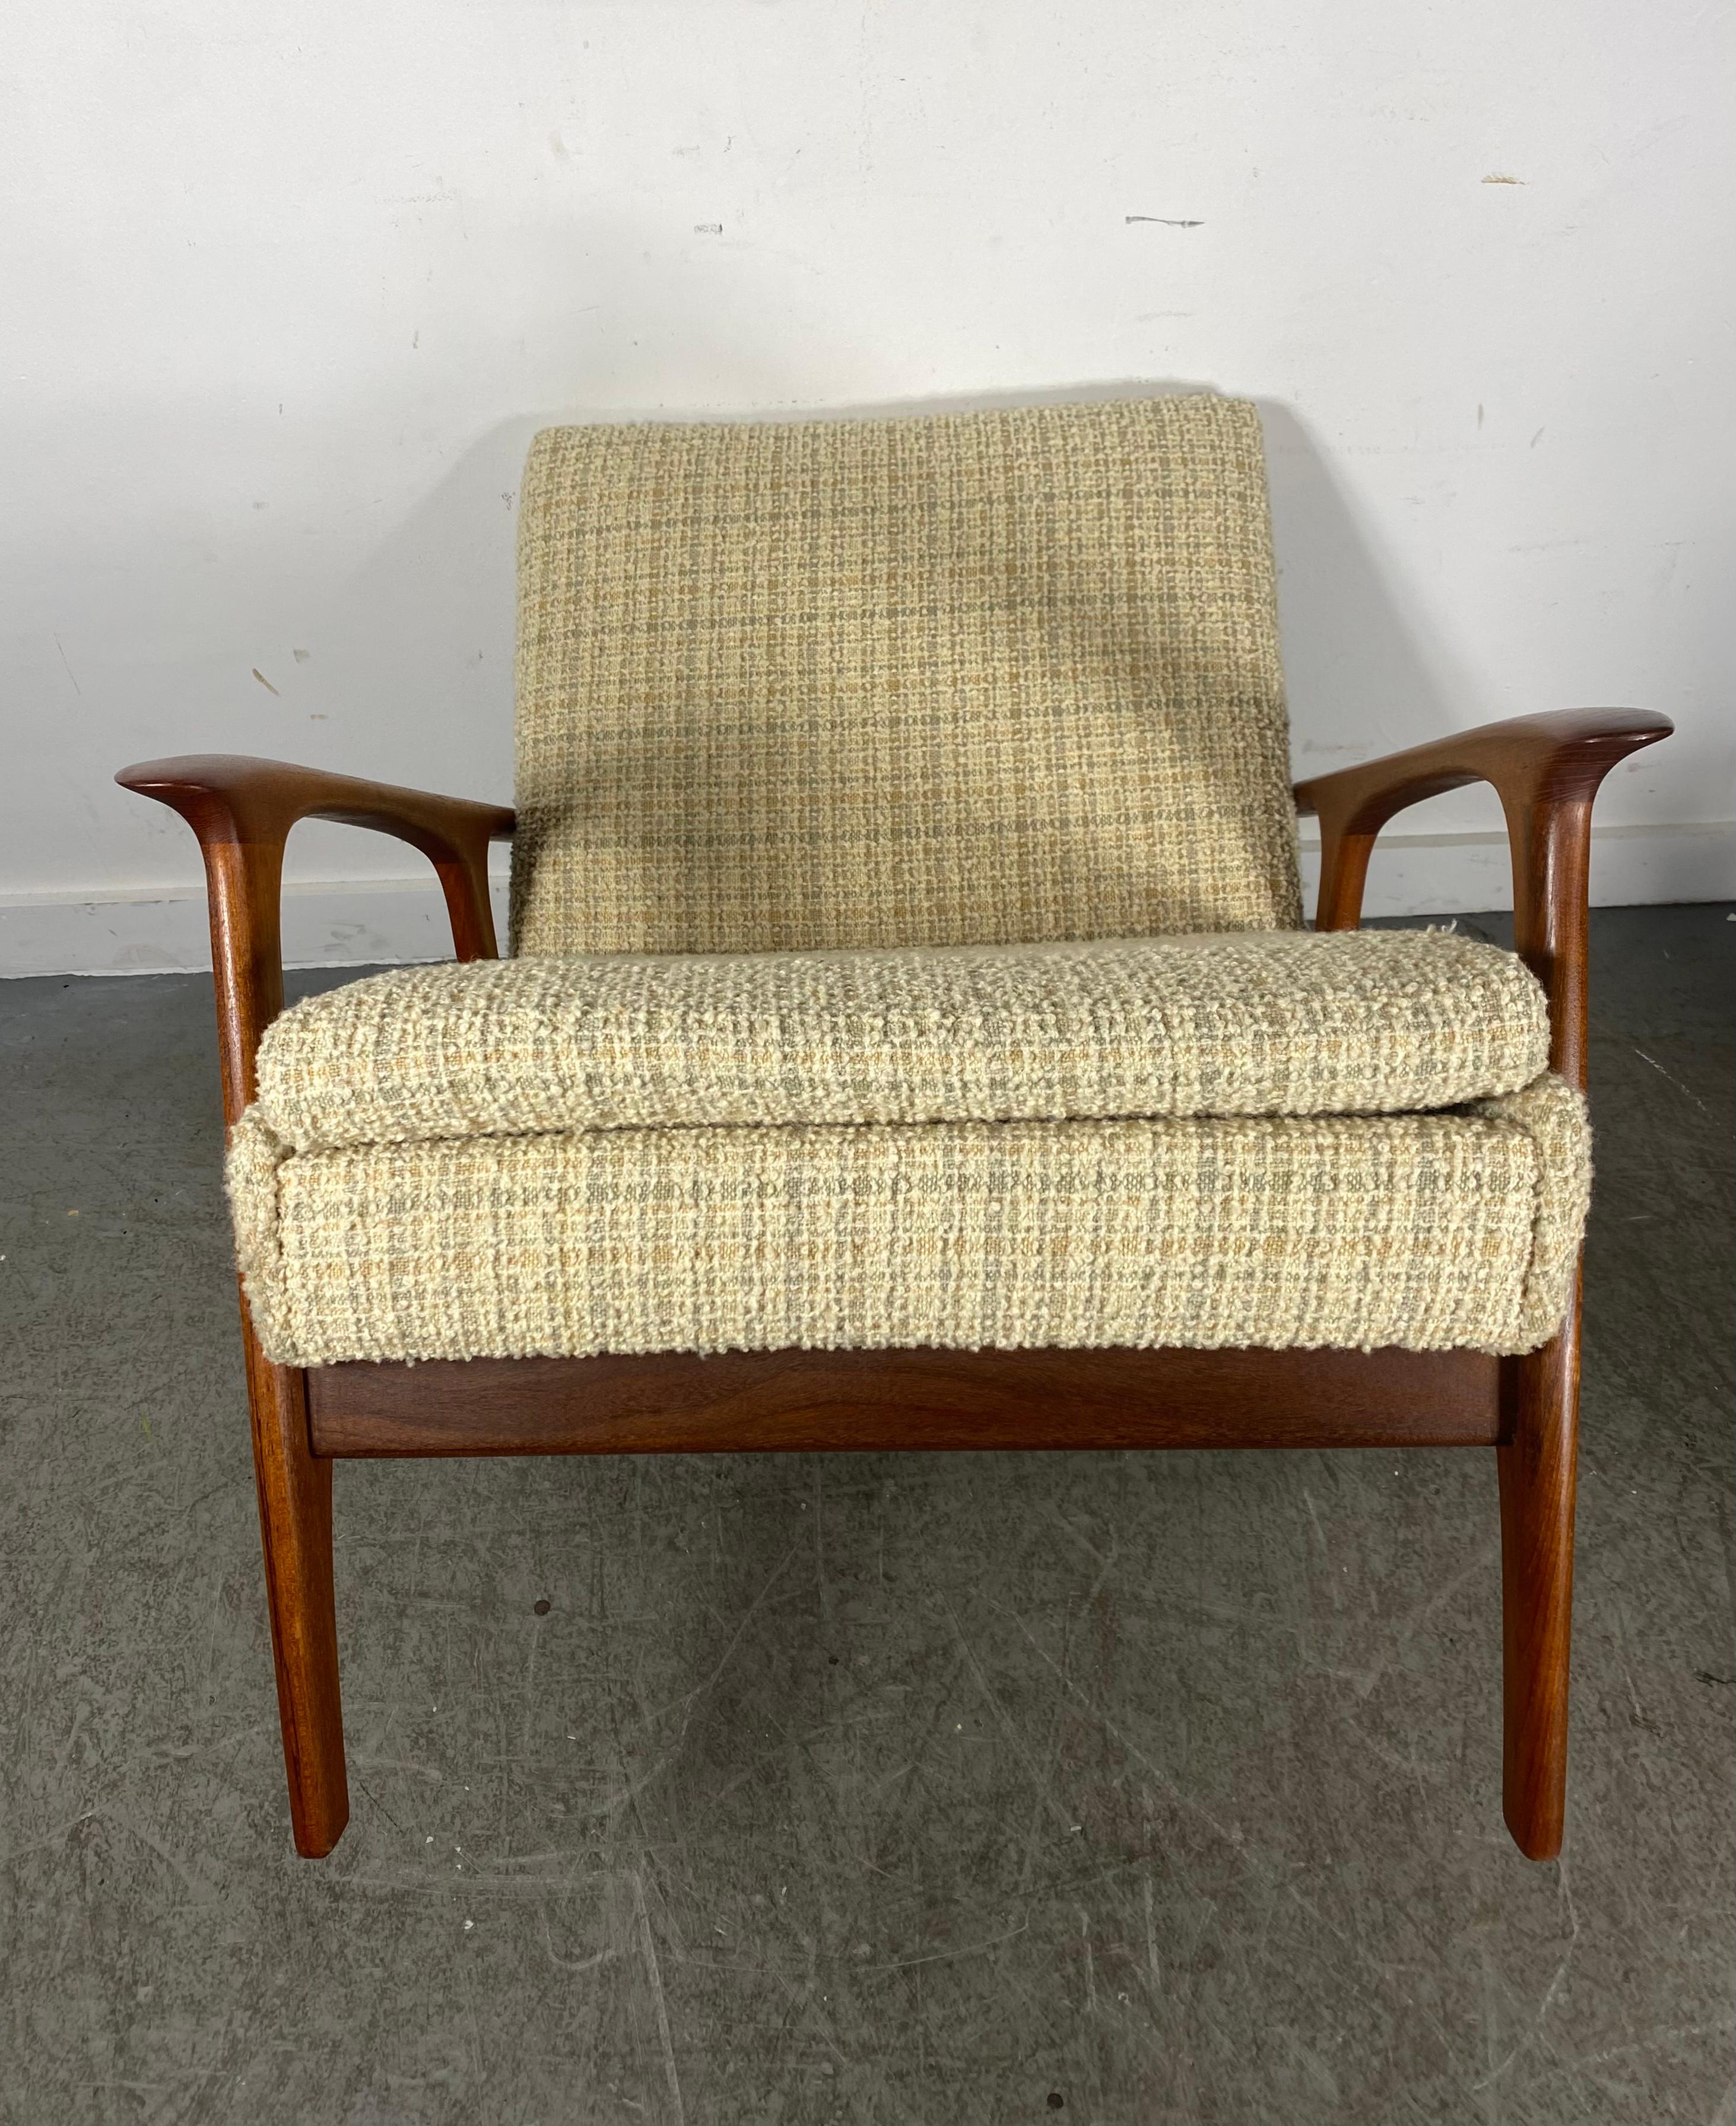 Classic Scandinavian Modern Teak Lounge Chair , manner Of Hans Wegner In Good Condition For Sale In Buffalo, NY